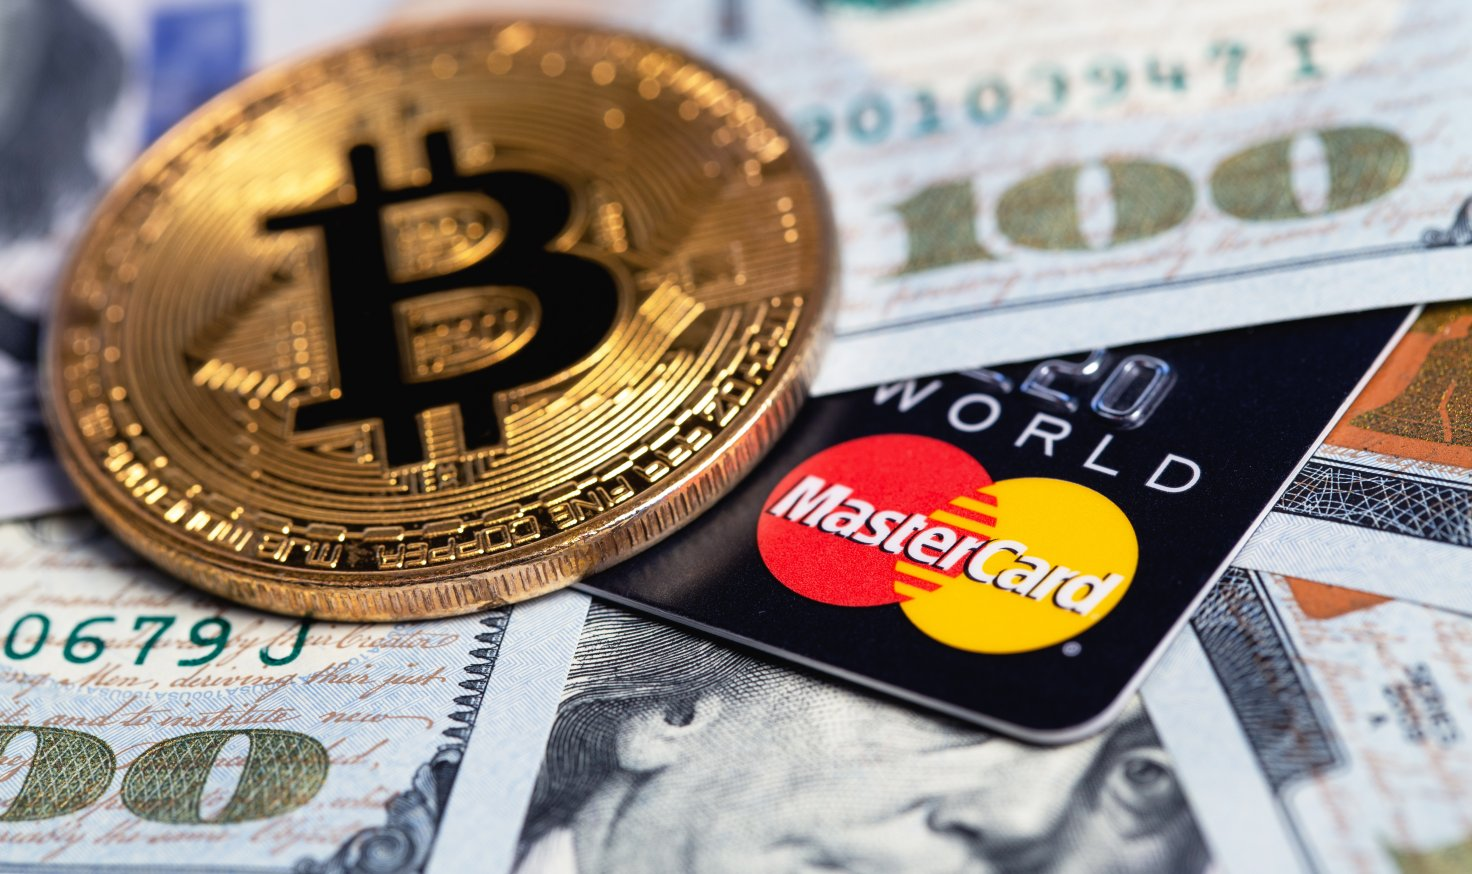 Credit Card Giant Mastercard Has Filed Many Trademark Applications For Cryptocurrency Service.